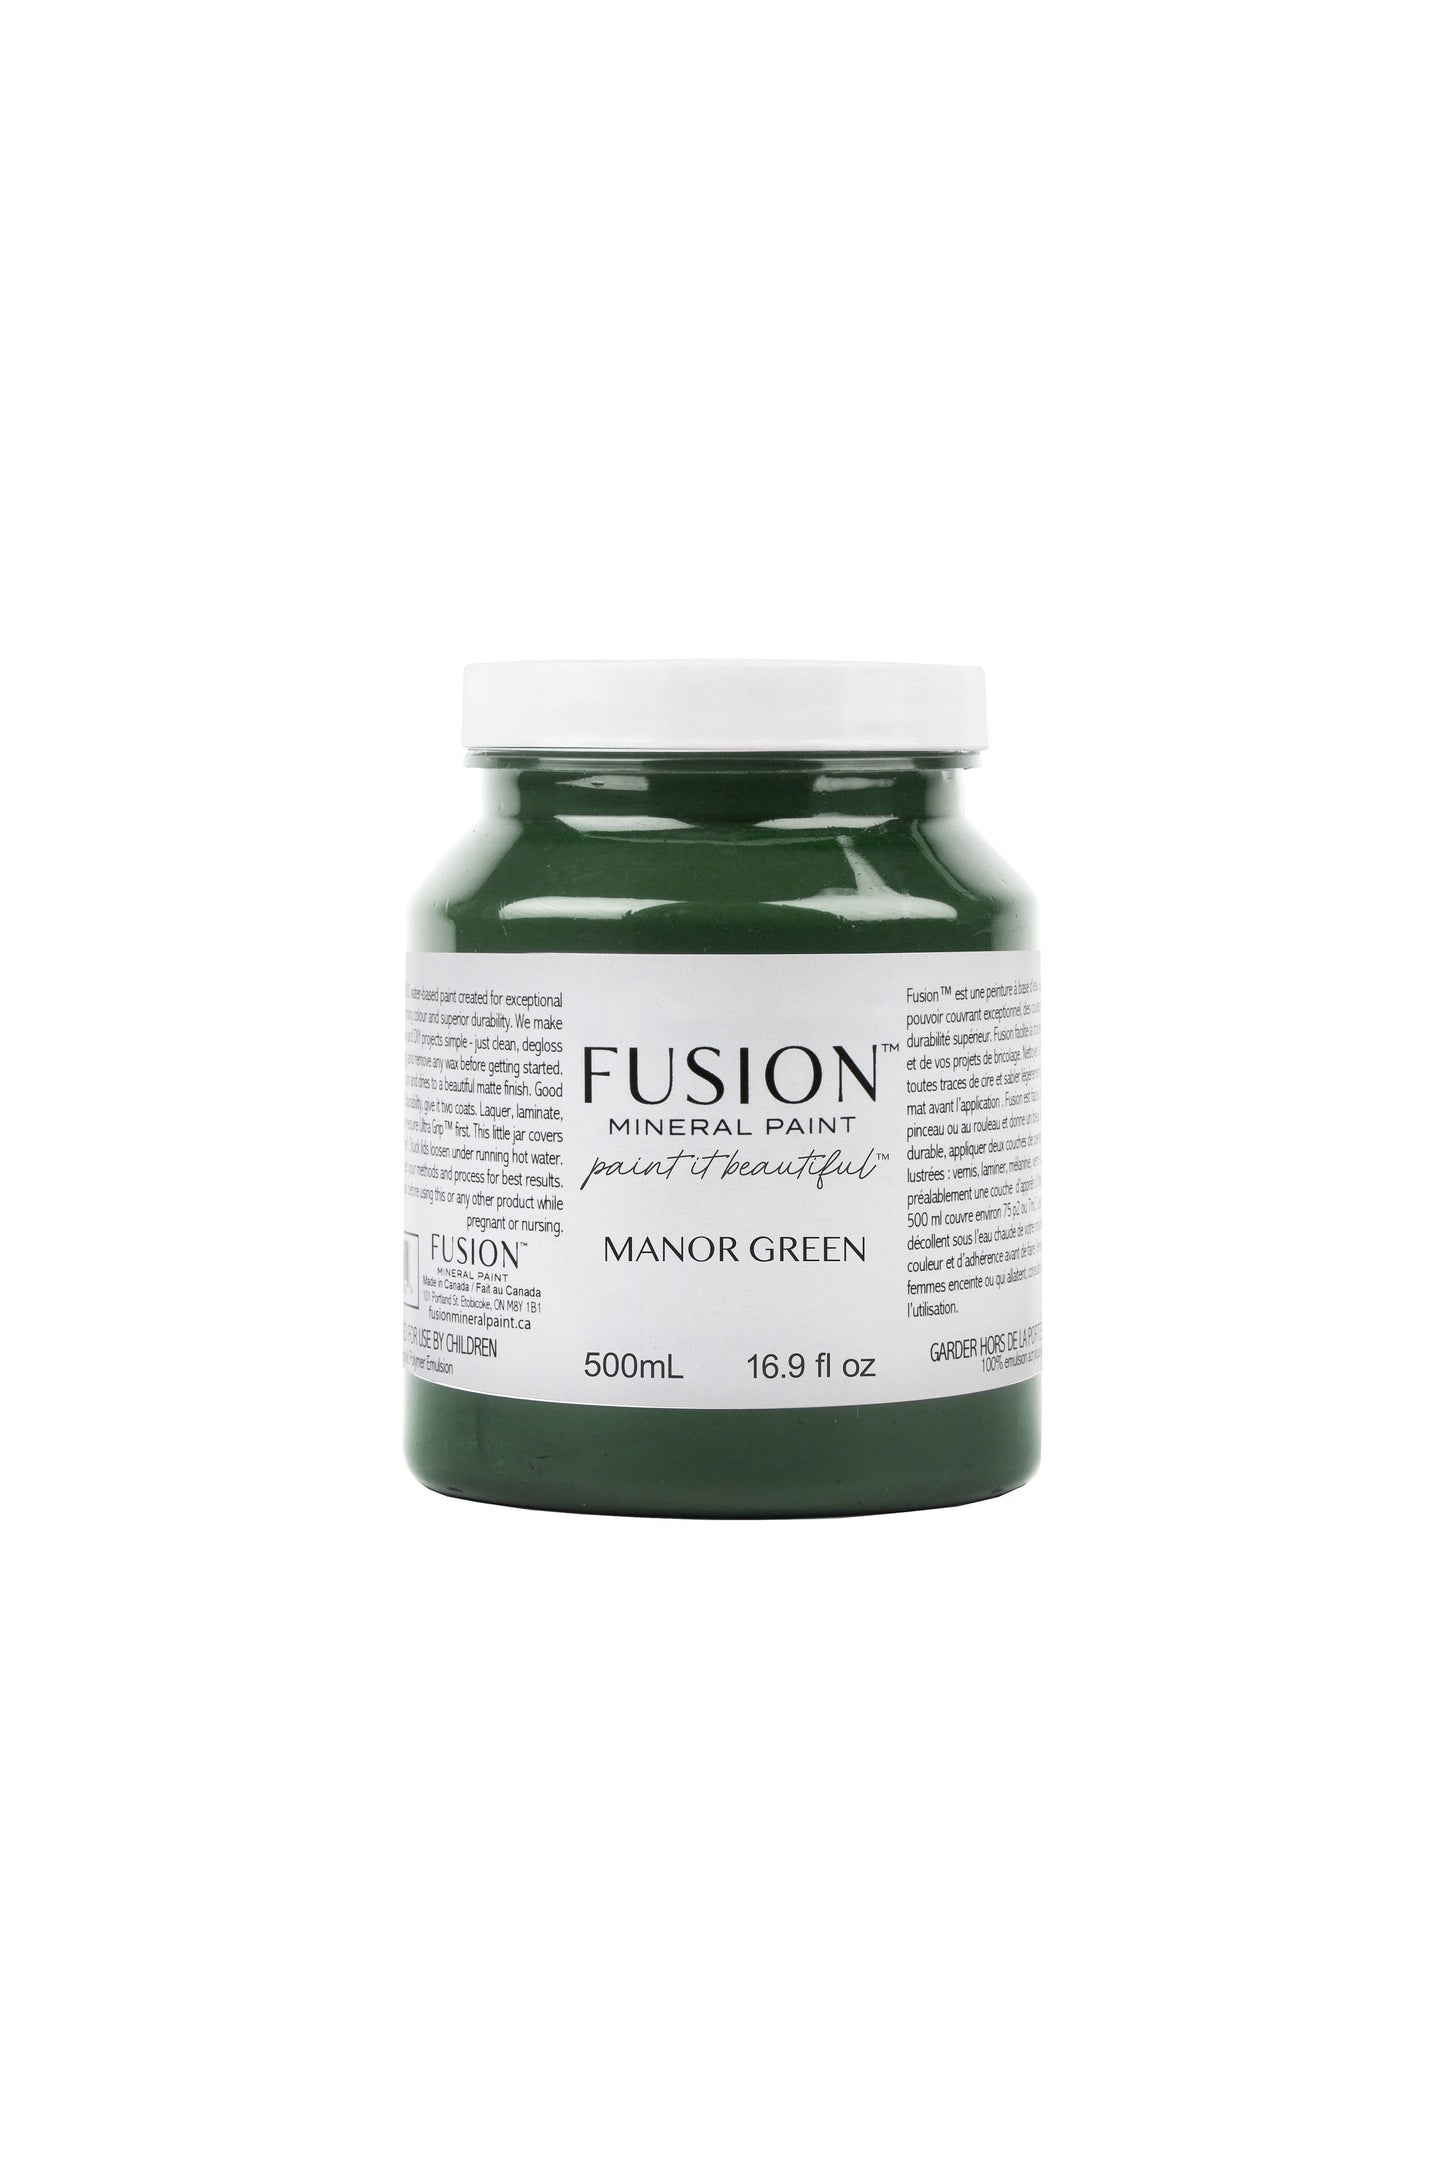 FUSION MINERAL PAINT- Manor Green